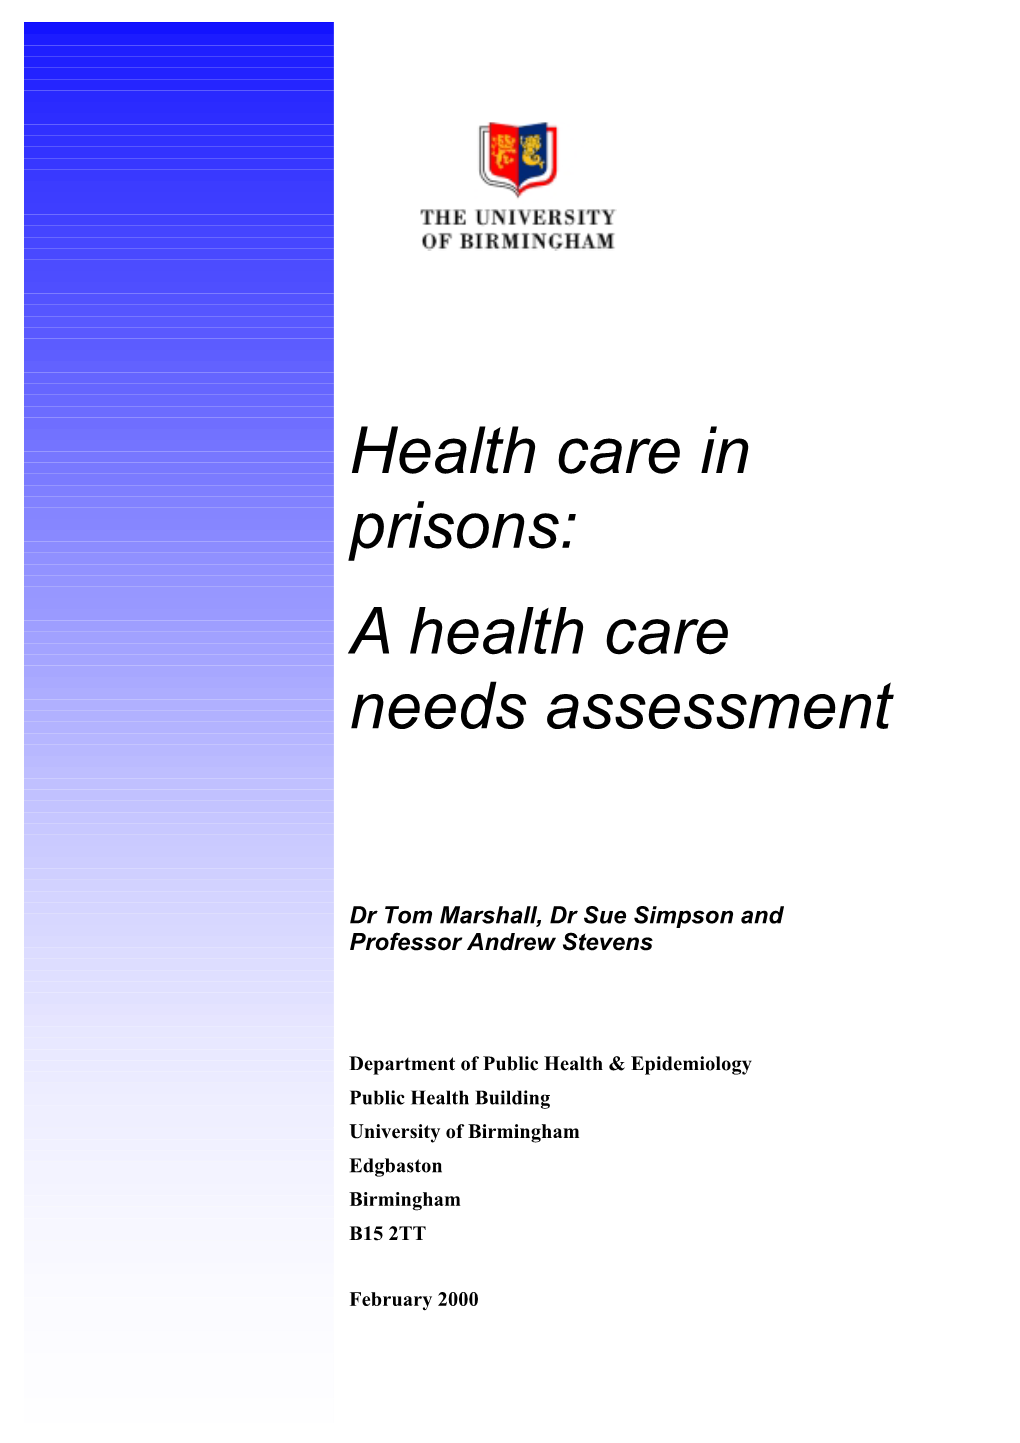 Health Care in Prisons: a Health Care Needs Assessment